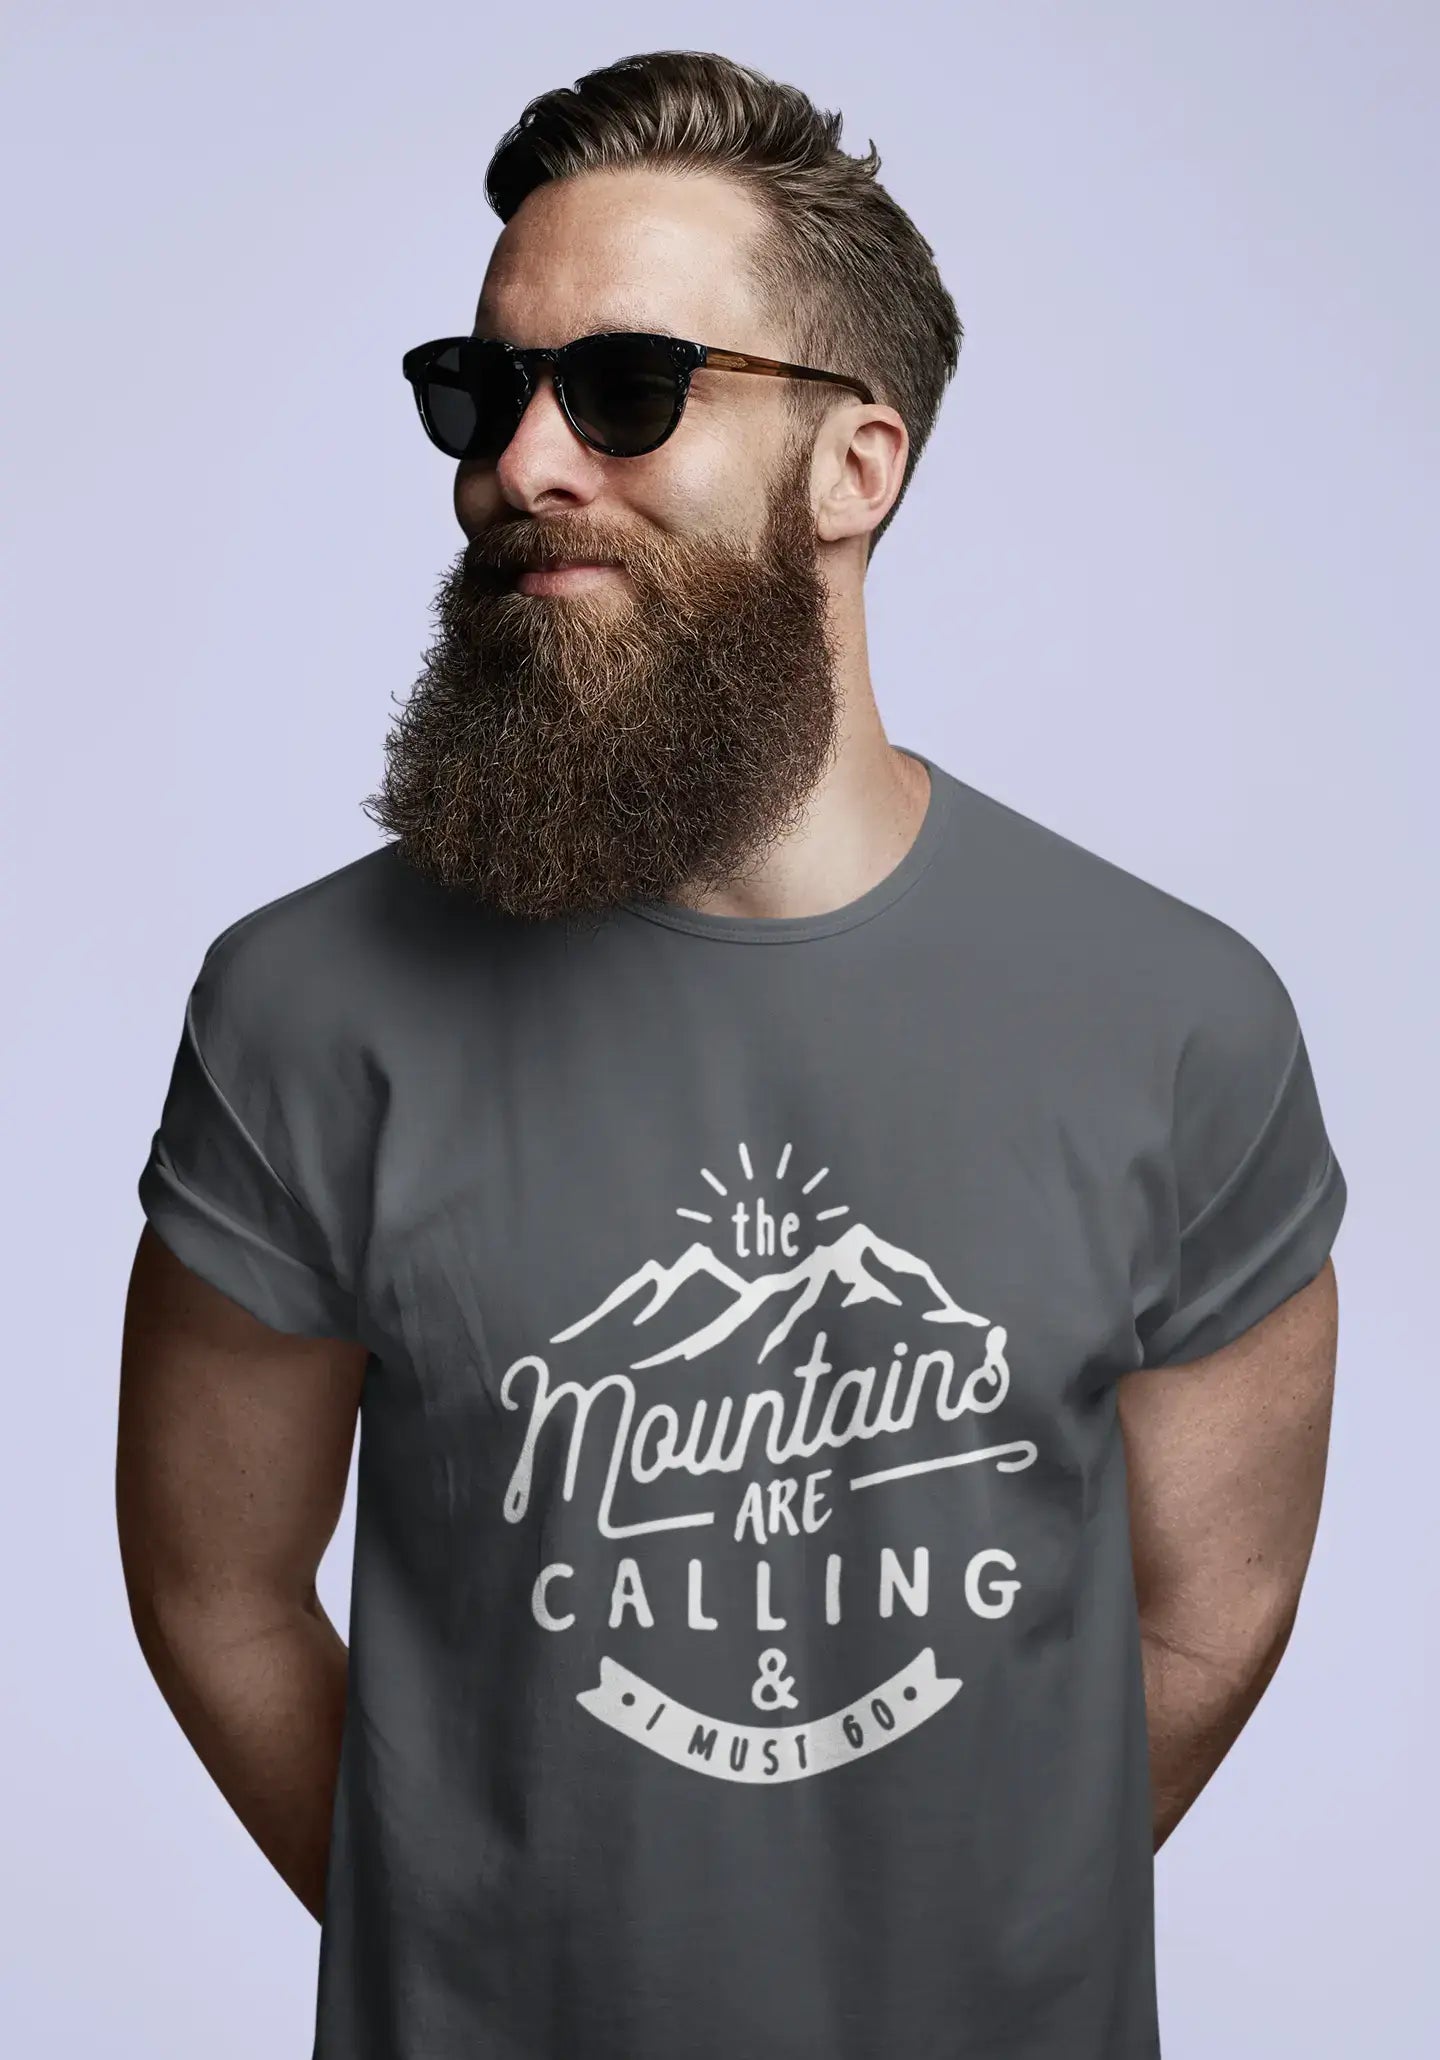 ULTRABASIC - Graphic Printed Men's The Mountains Are Calling And I Must Go Hiking Tee Military Green